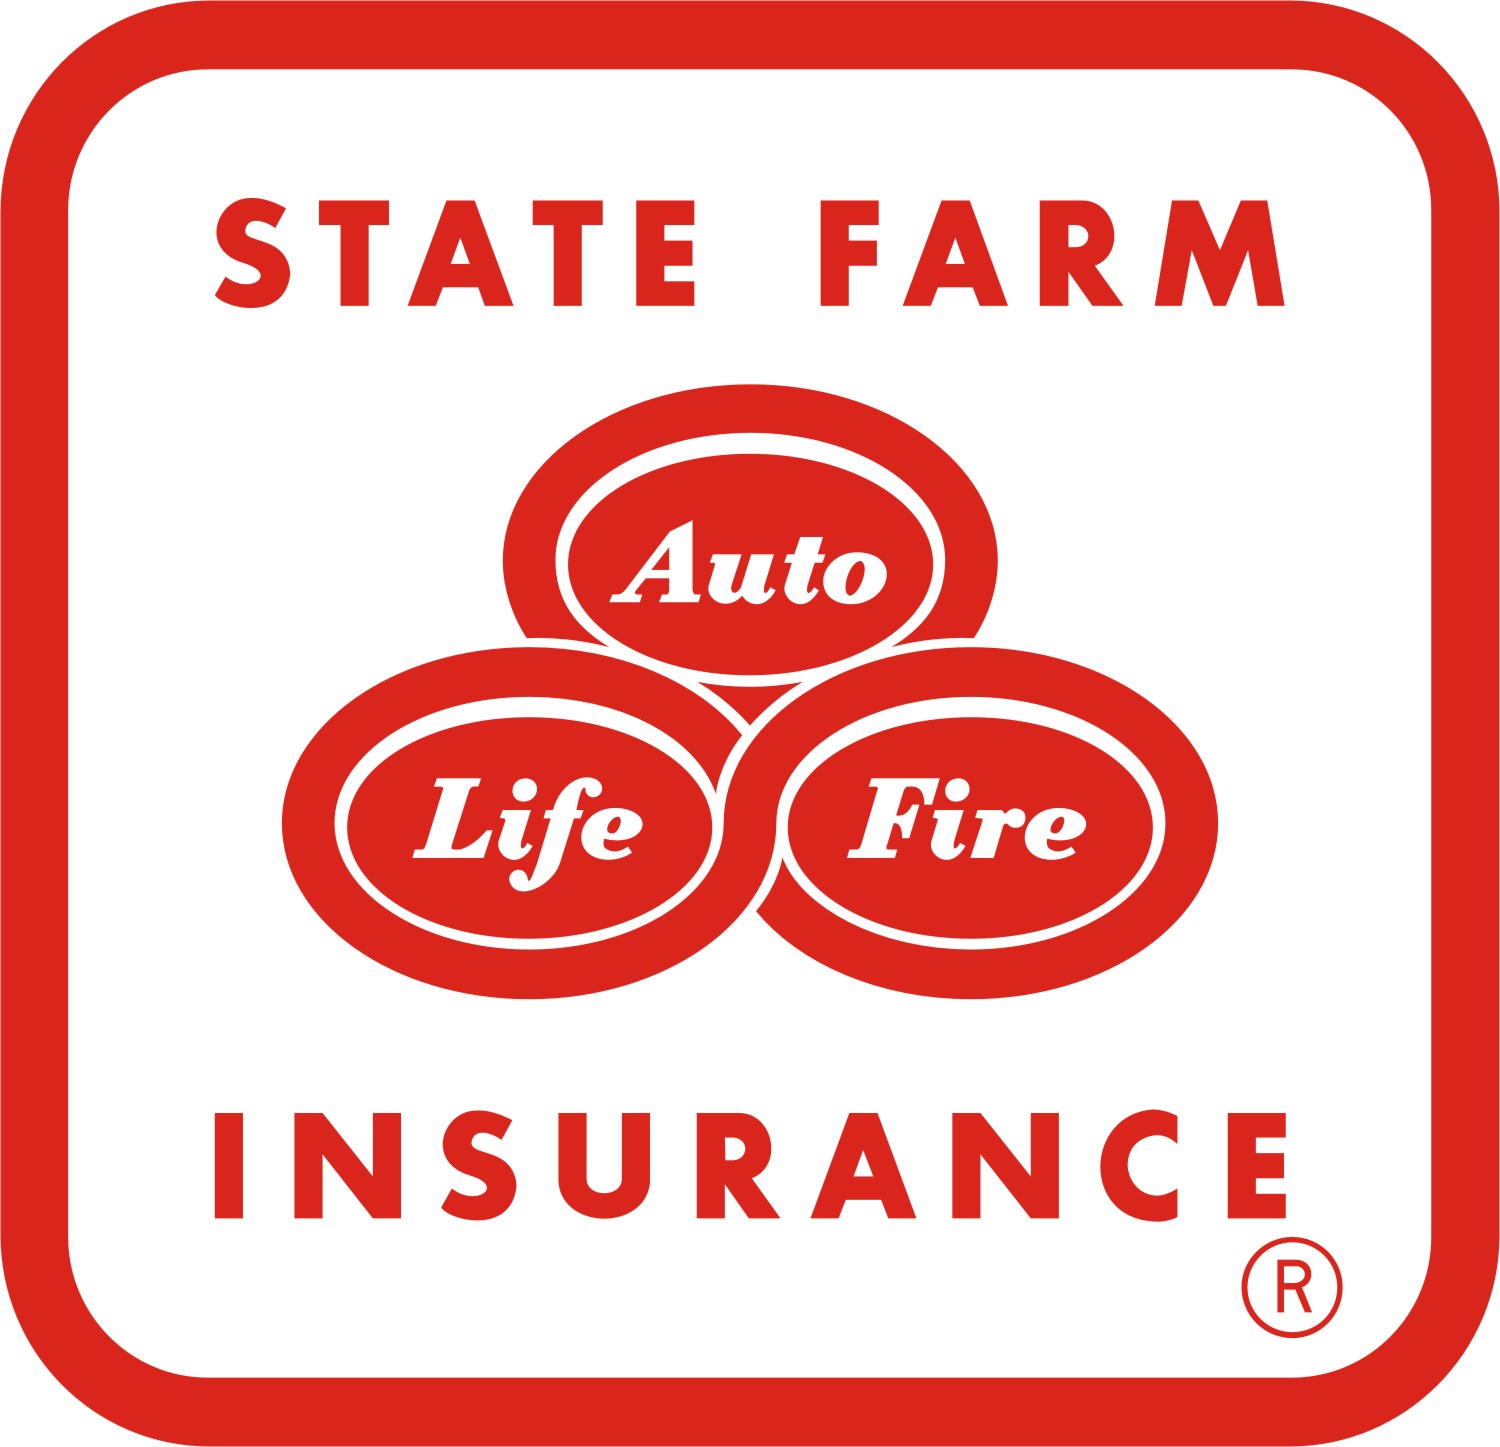 State Farm was started in 1922 for farmers: the founder, George Jacob